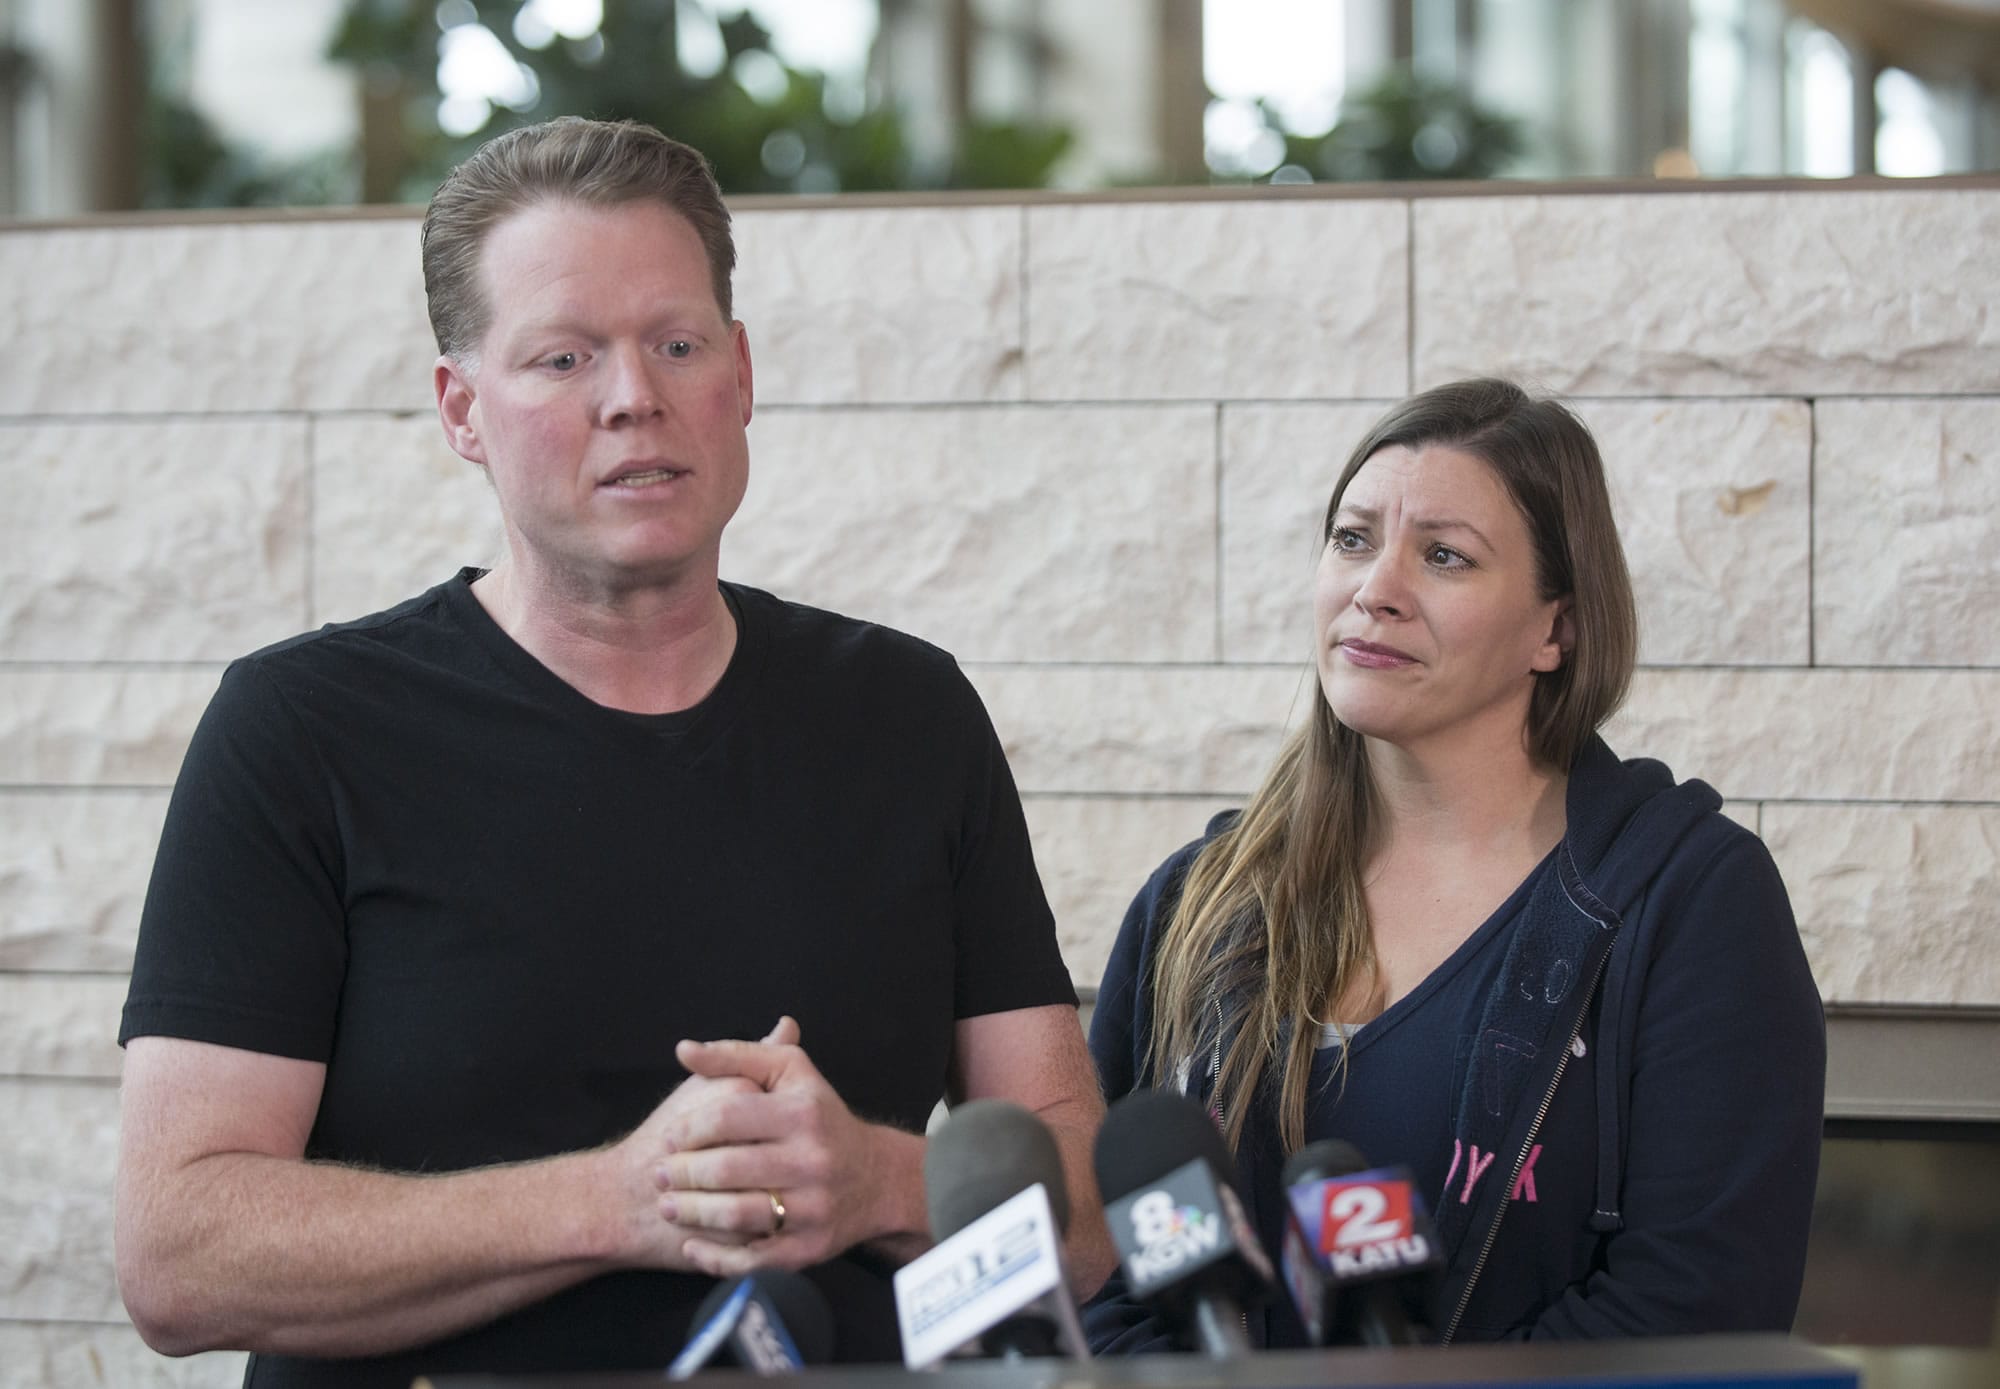 Andrew Yates, left, speaks about the condition of his daughter, Chloe Yates, 17, who was critically injured in a head-on collision on I-5 the evening of October 9, while Shannon Yates, Chloes mother, right, listens to her husbands statement during a press conference at PeaceHealth Southwest Medical Center, Friday October 20, 2017.